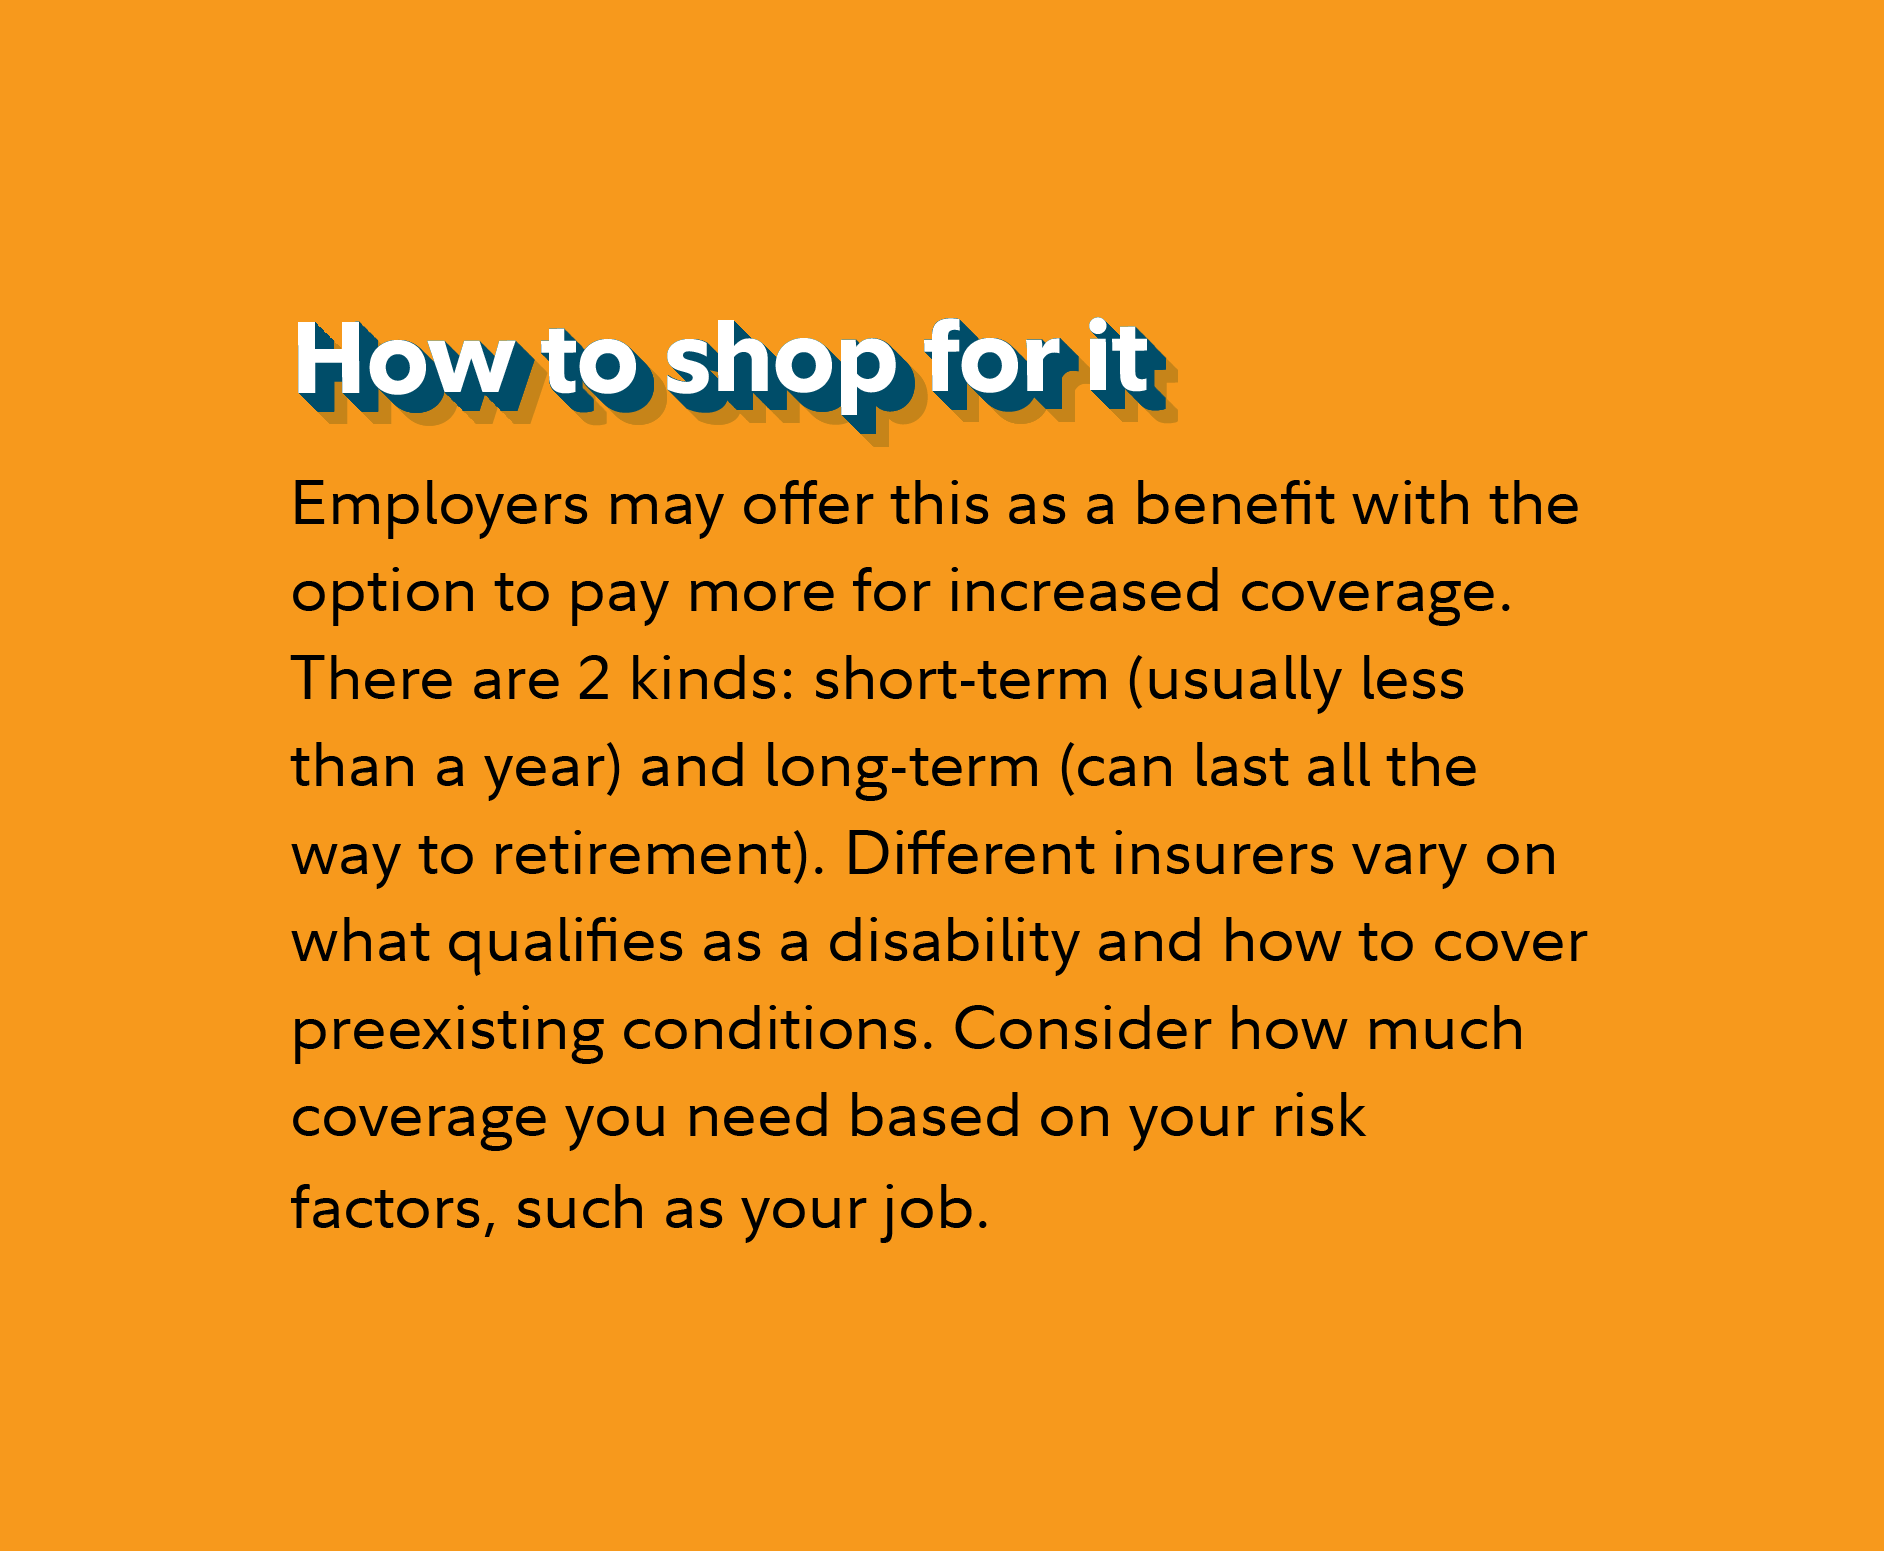 How to shop for it Employers may offer this as a benefit with the option to pay more for increased coverage. There are 2 kinds: short-term (usually less than a year) and long-term (can last all the way to retirement). Different insurers vary on what qualifies as a disability and how to cover preexisting conditions. Consider how much coverage you need based on your risk factors, such as your job.